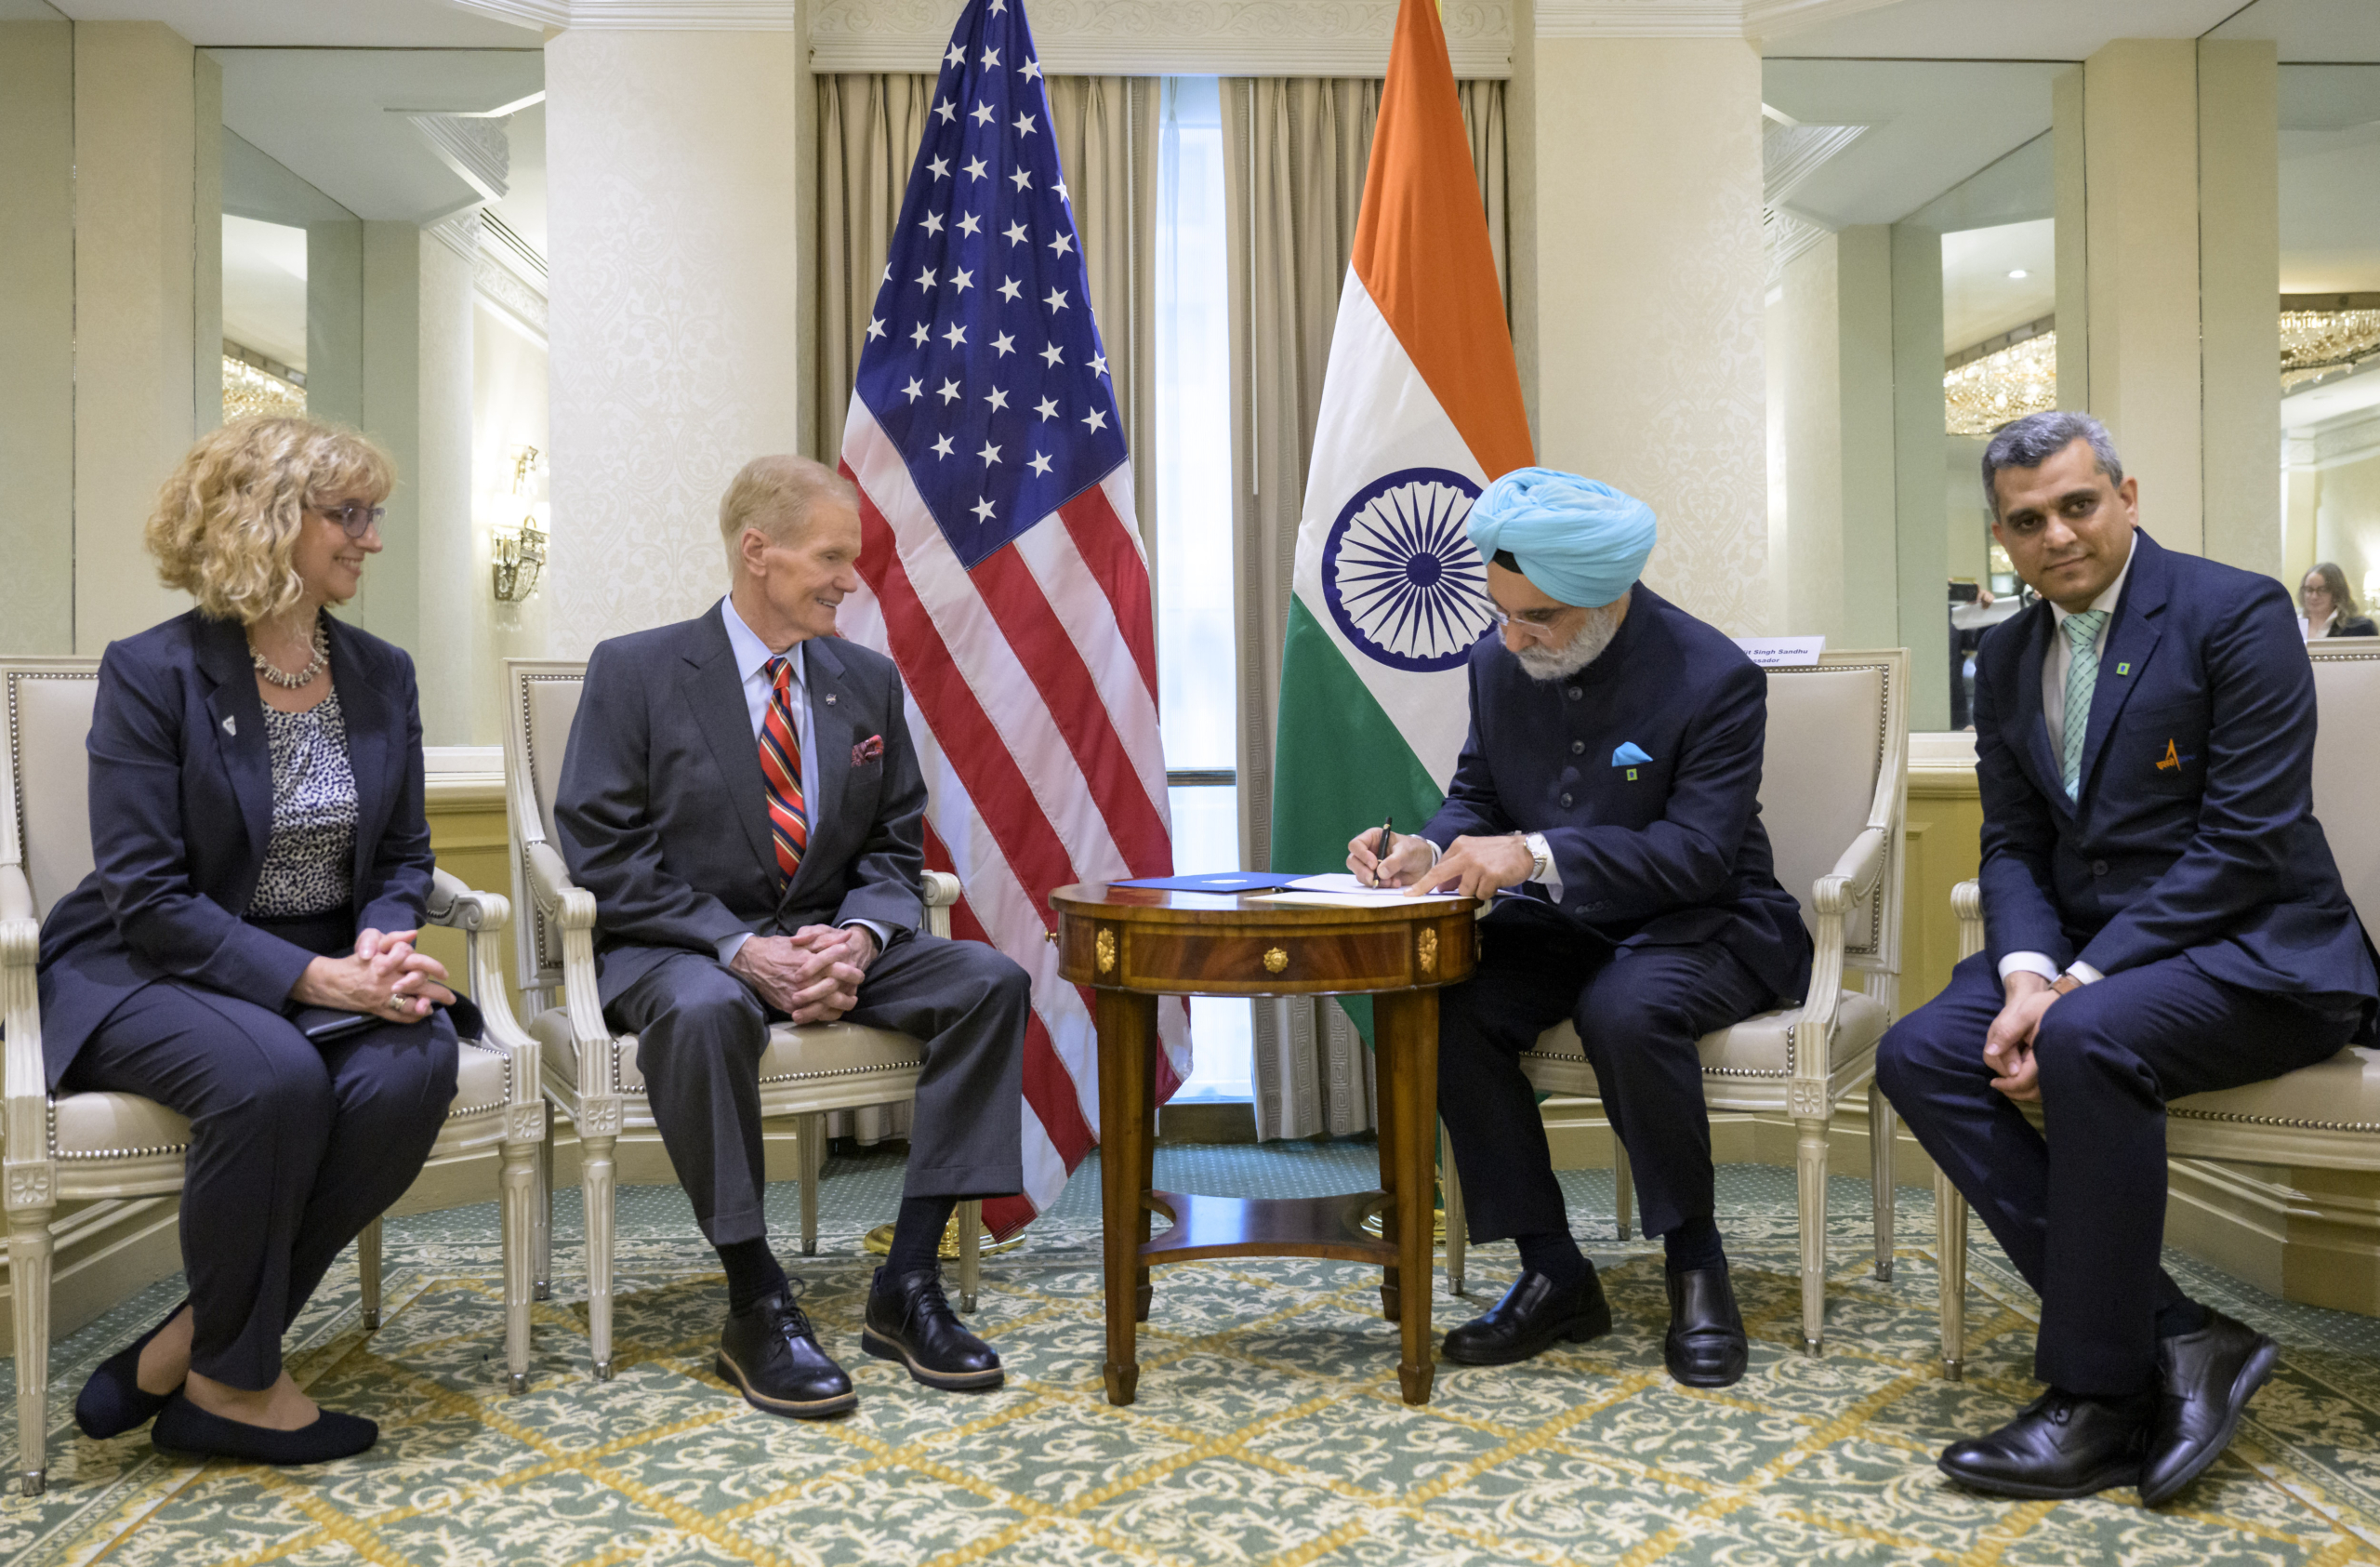 Four people sit facing forward, and not toward each other. They all are wearing suits. One person in a light blue turban signs a document on a small table in front of him. Two flags stand behind the middle two people.